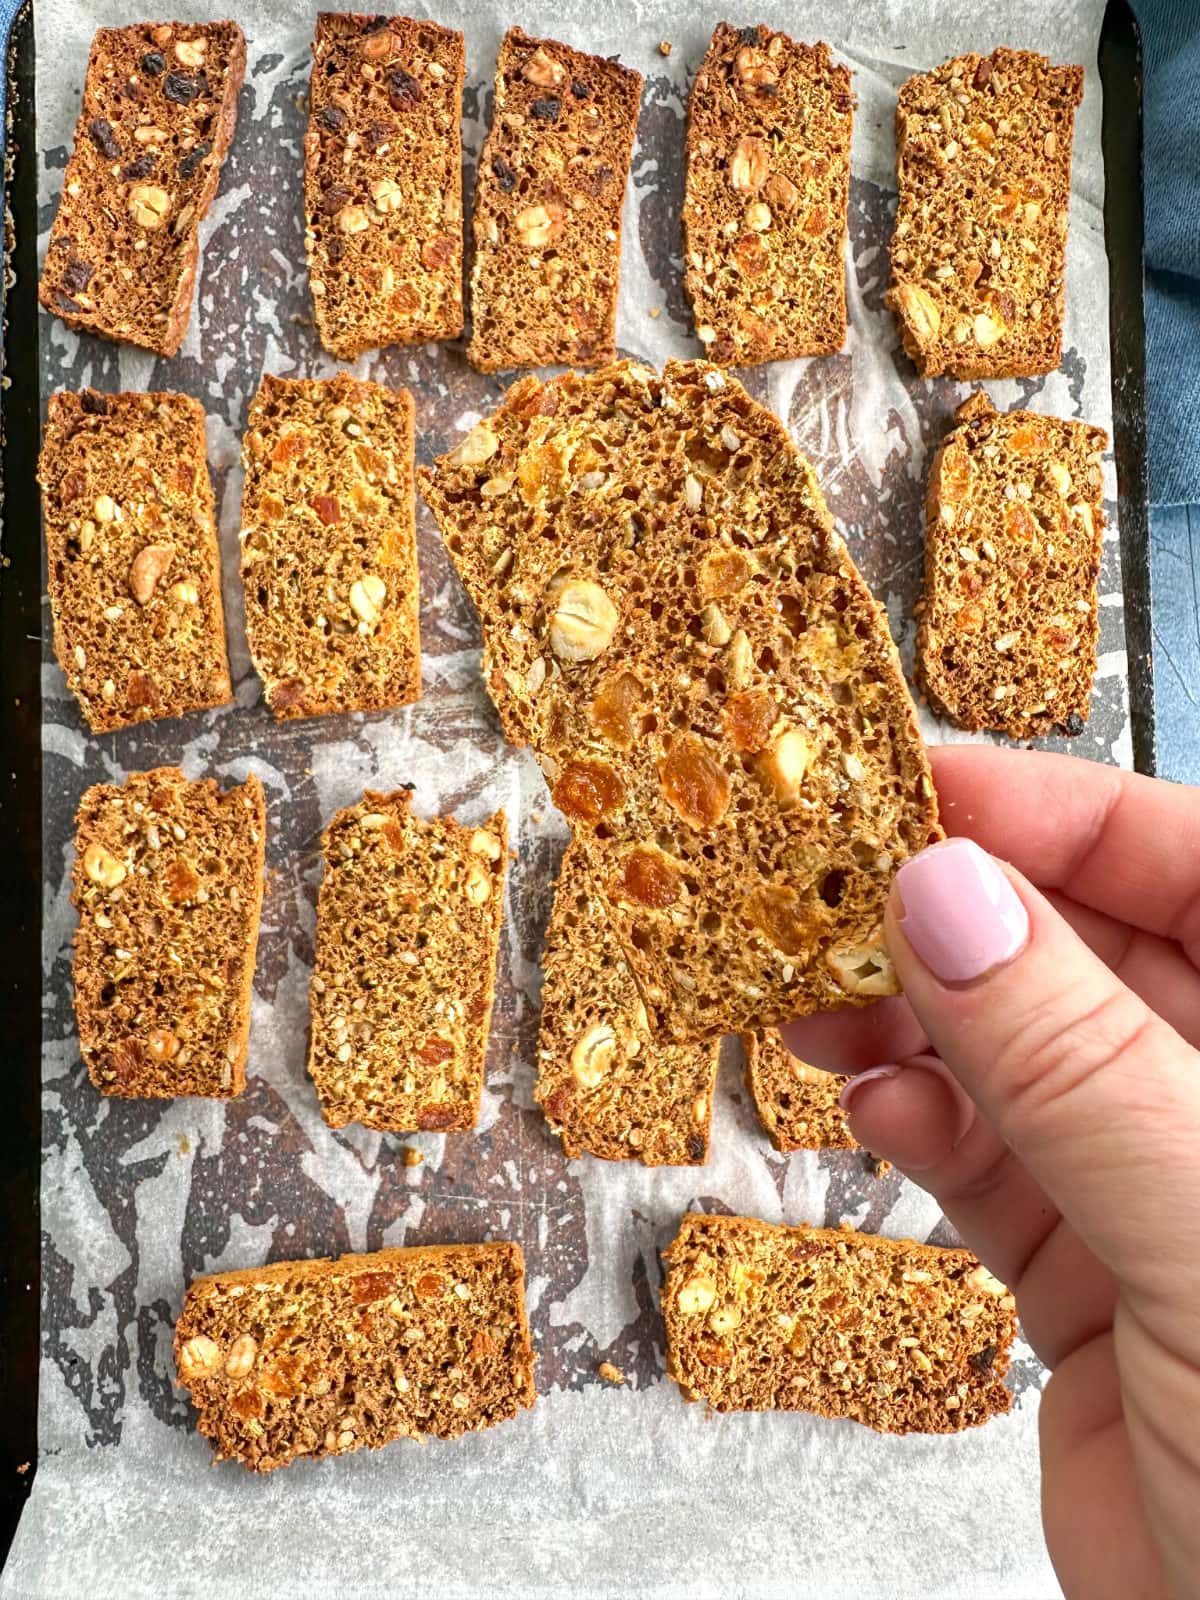 A hand holding a homemade copycat gourmet cracker with apricot, rosemary and cashews